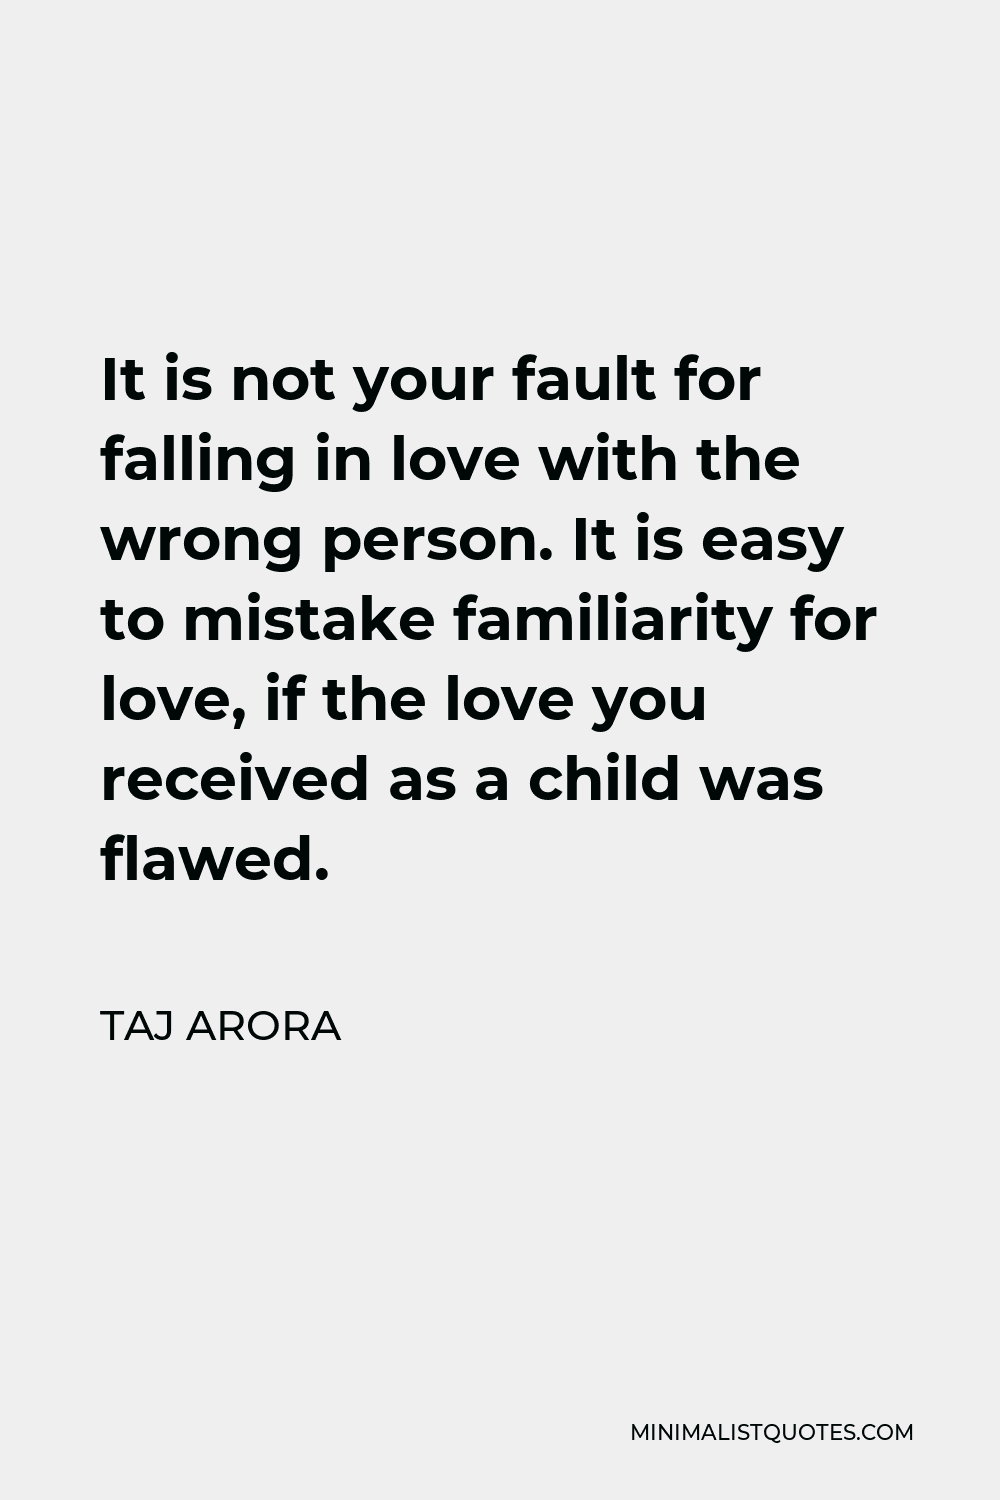 Taj Arora Quote - It is not your fault for falling in love with the wrong person. It is easy to mistake familiarity for love, if the love you received as a child was flawed.